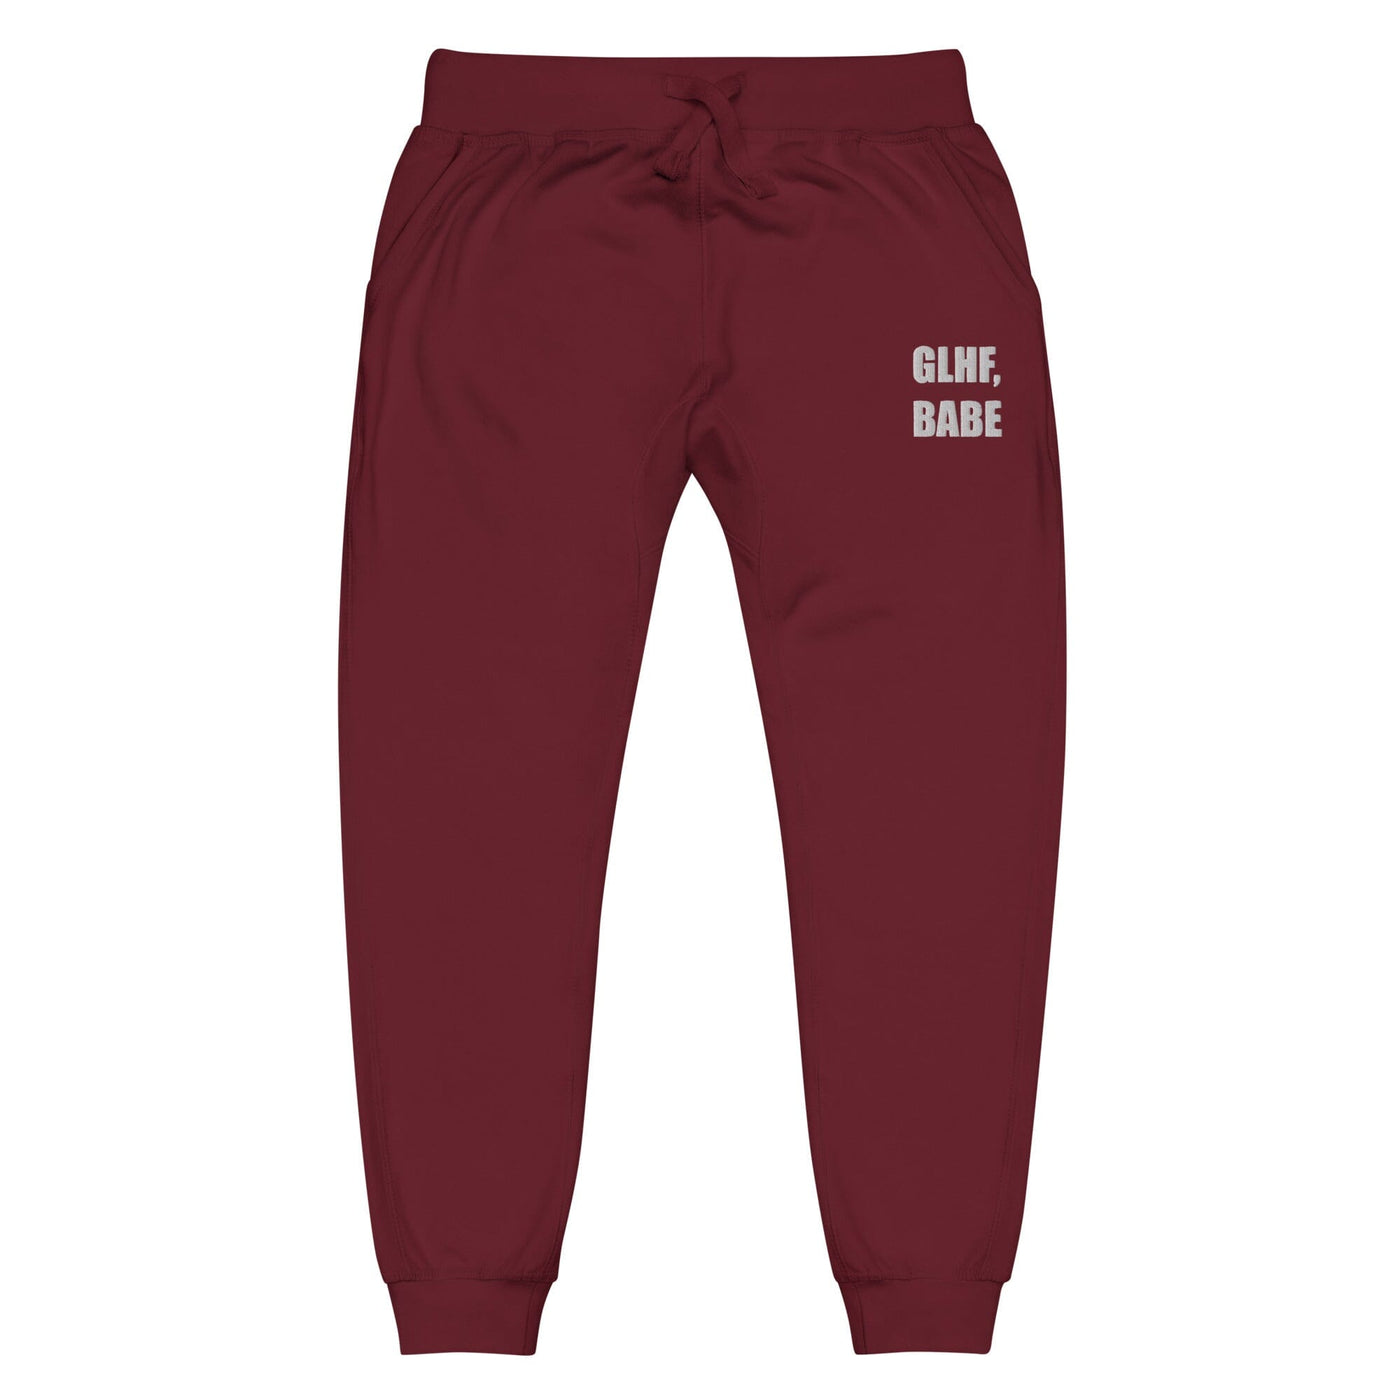 GLHF, Babe | Unisex fleece sweatpants | Gamer Affirmations Threads & Thistles Inventory Maroon XS 